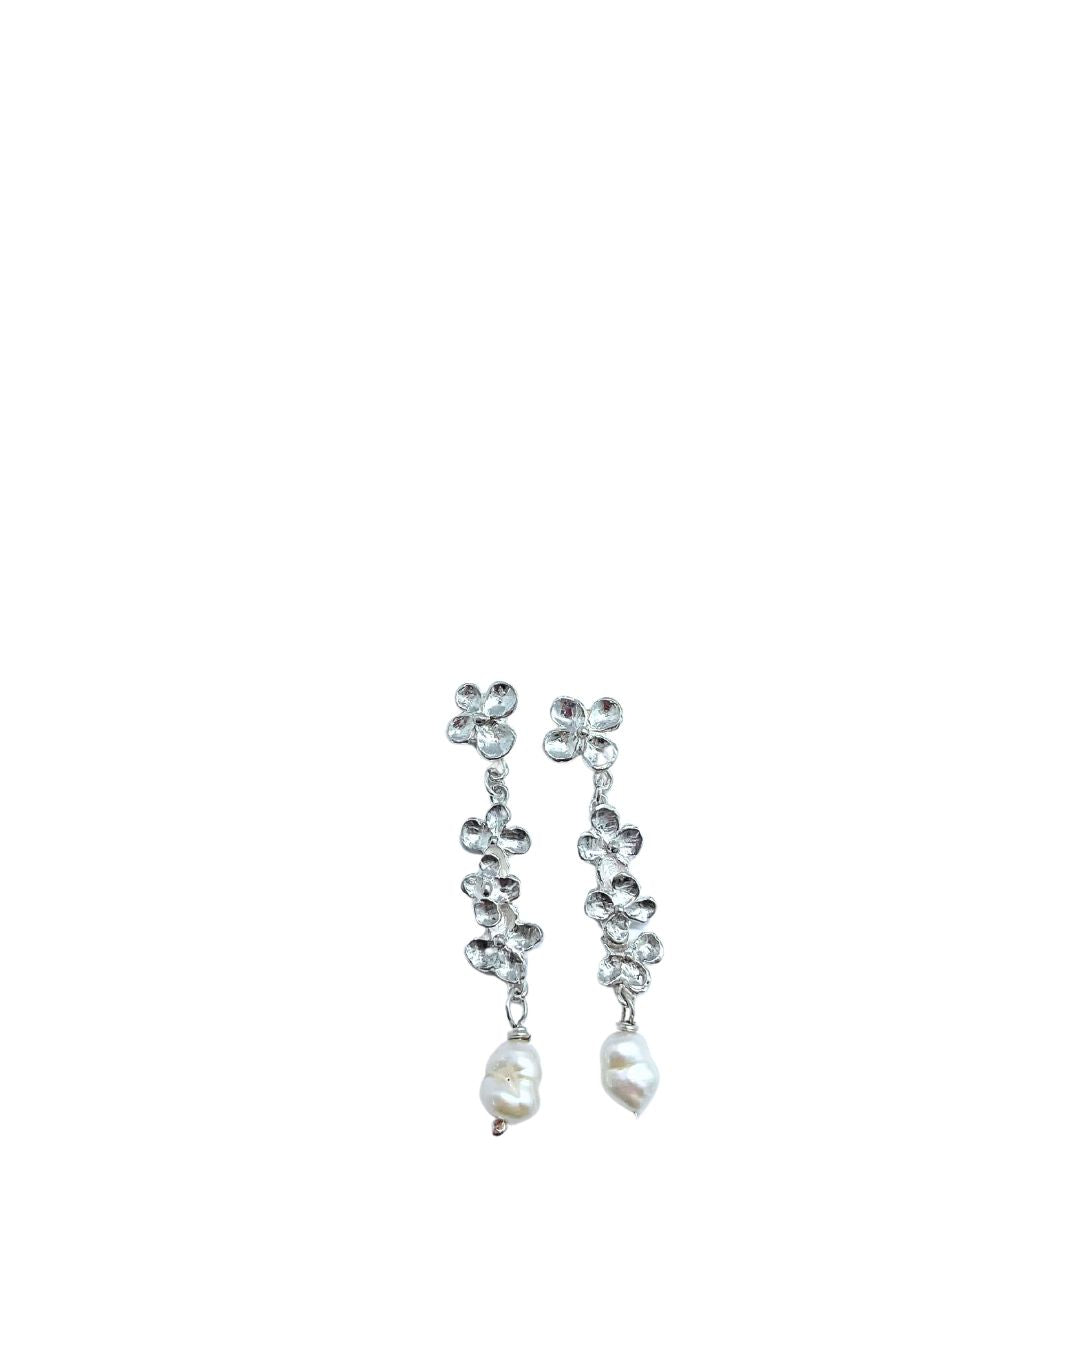 The front view of a pair of Hydrangea and Keshi Pearl Sterling Silver Dangle Earrings. A single Hydrangea flower Stud with three flowers hanging below with a Keshi Pearl dangle below the central flower trail.